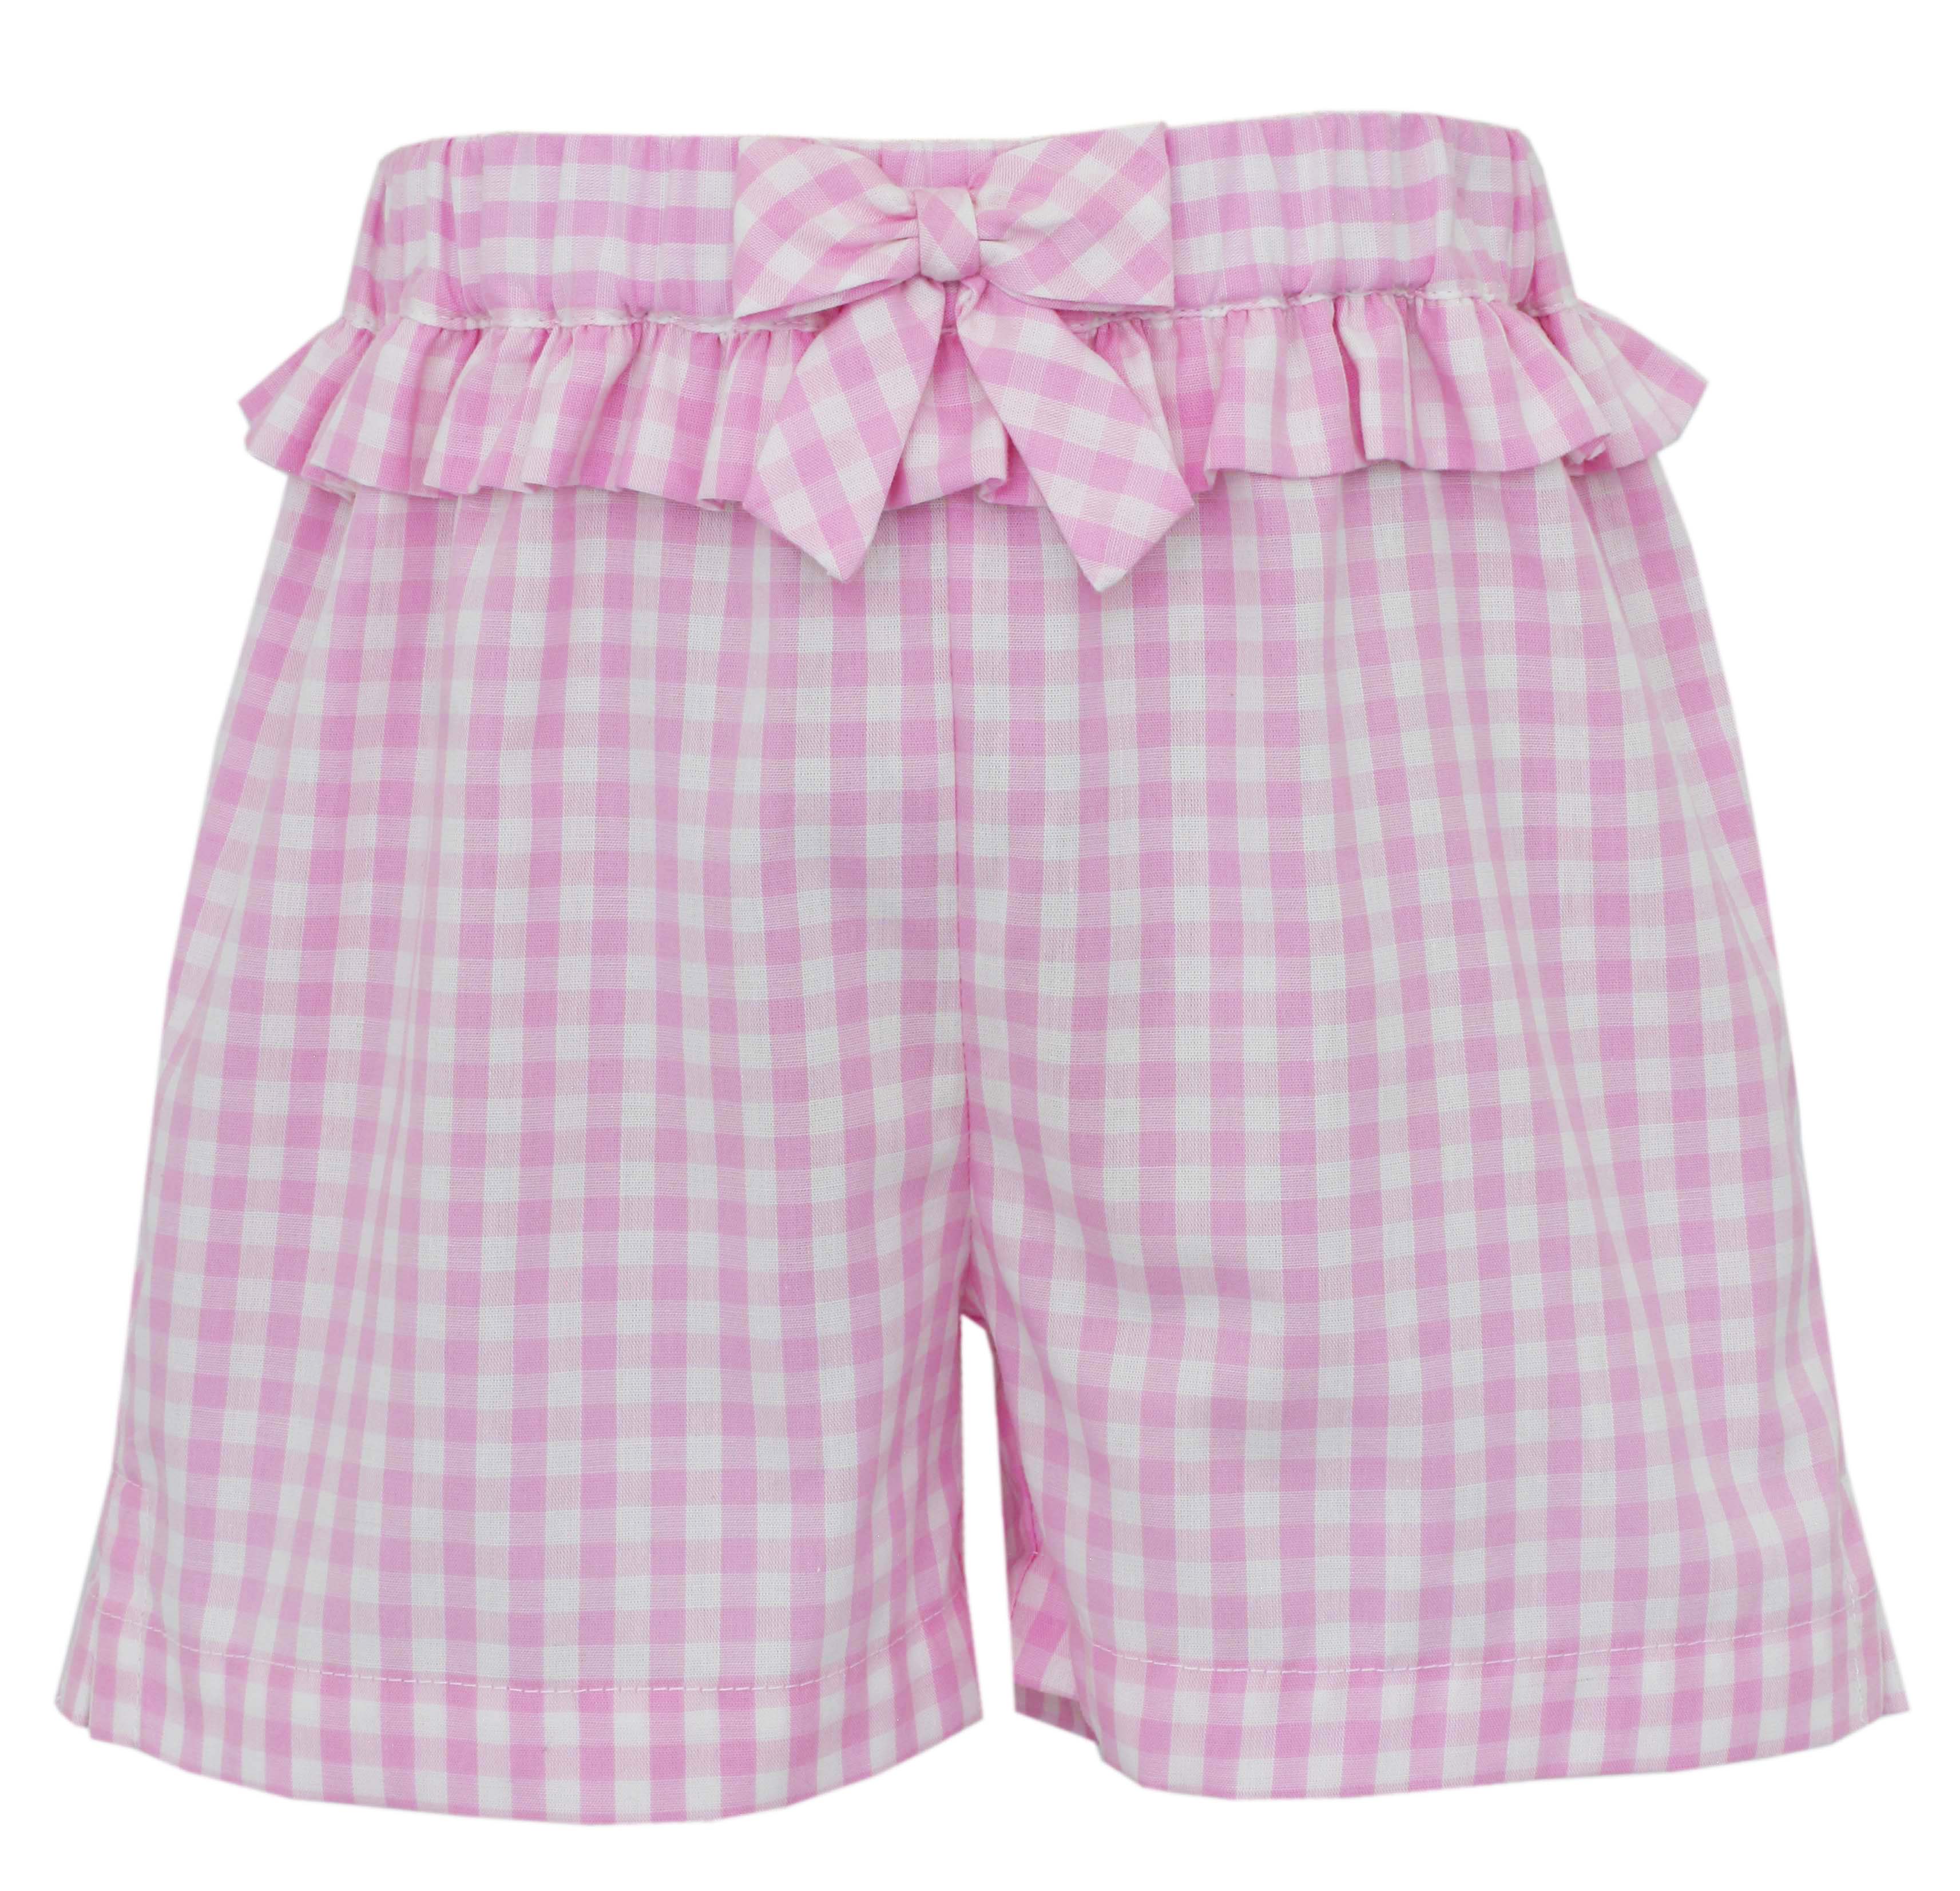 Girl's Cottontails Pink Gingham Shorts